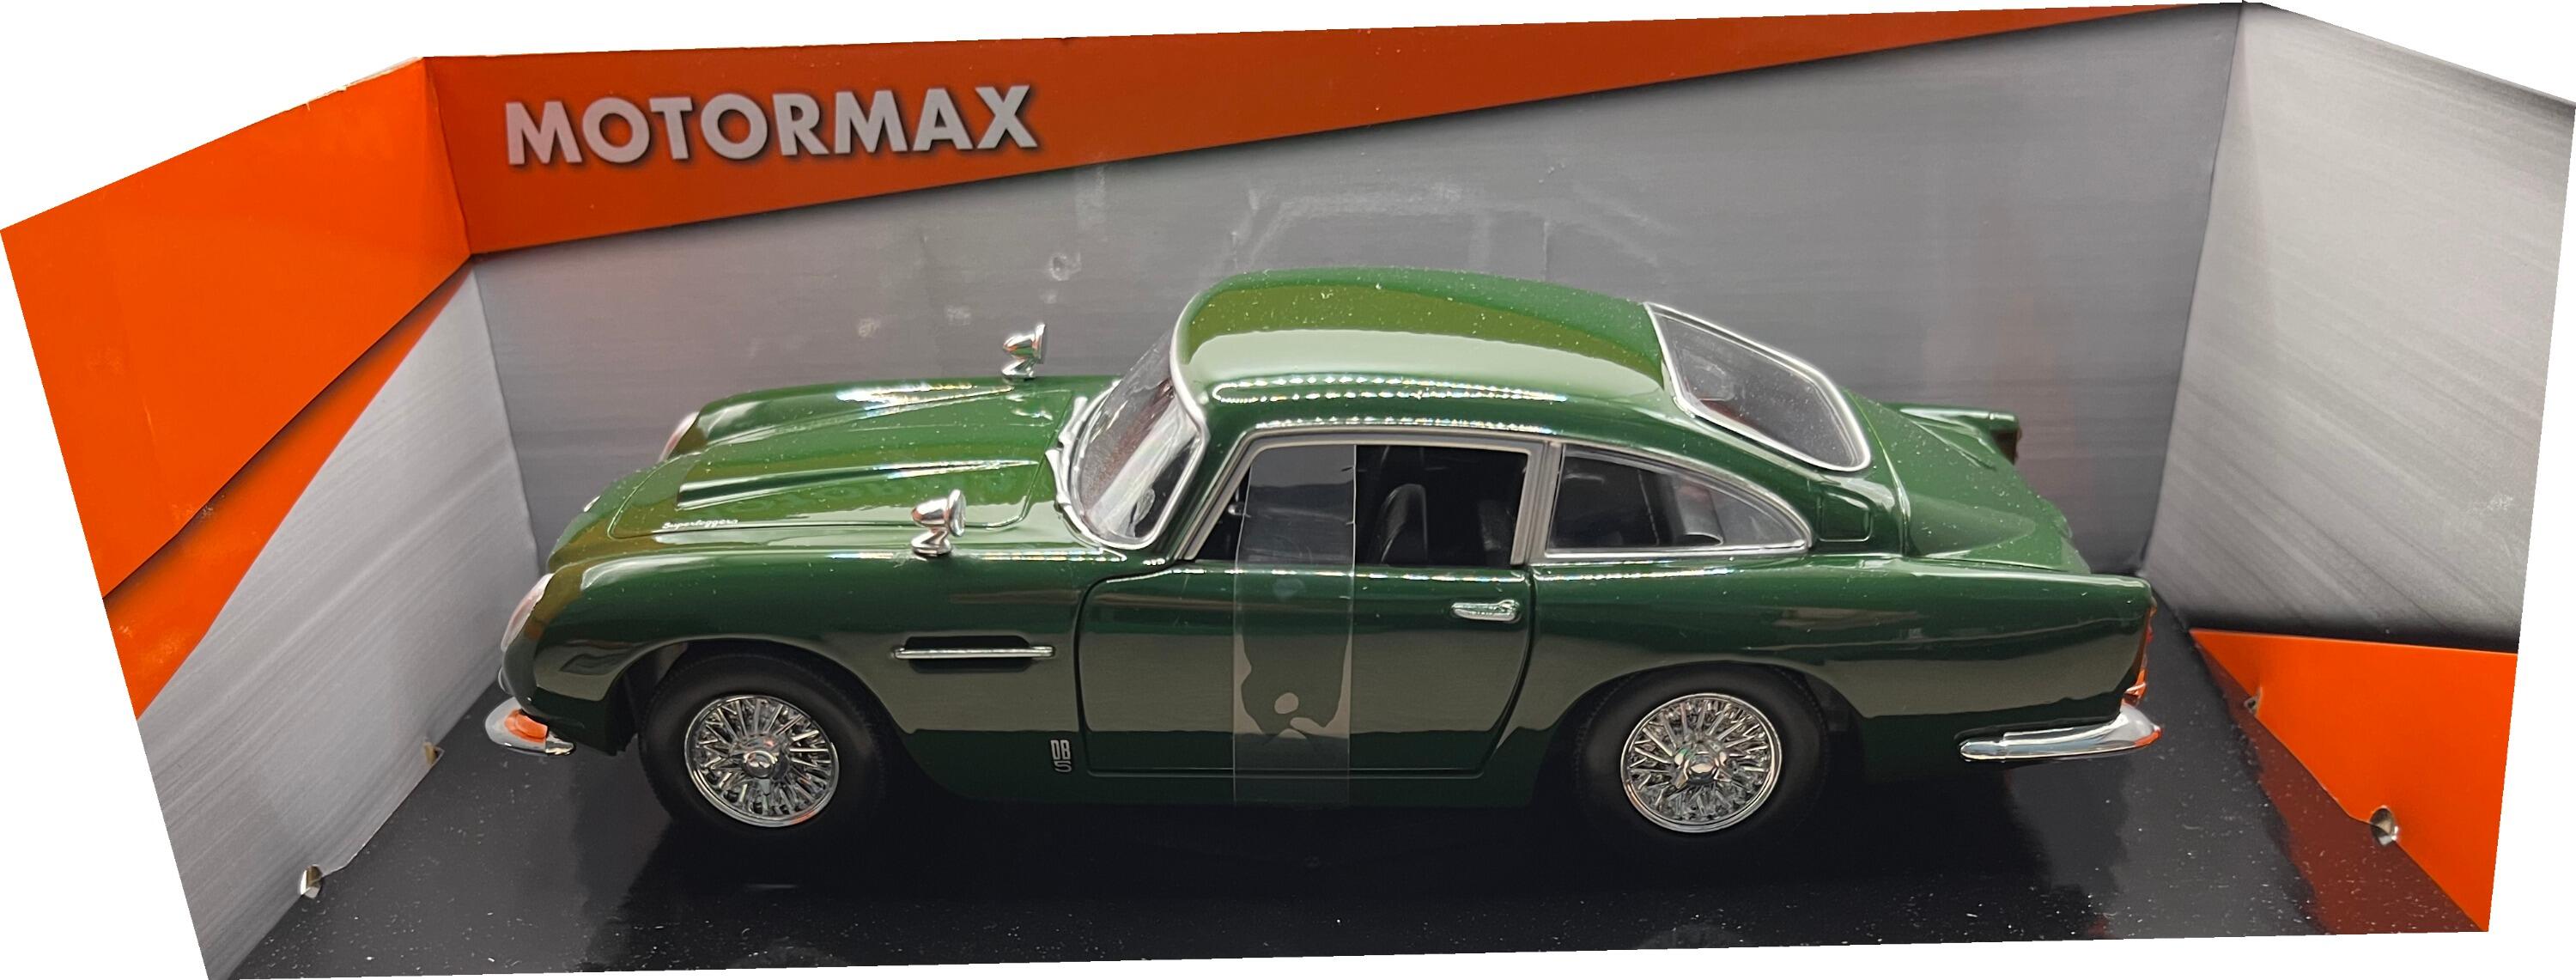 A great reproduction of the Aston Martin DB5 with detail throughout, all authentically recreated.  The model is presented in a window display box, the car is approx. 19 cm long and the presentation box is 24½ cm